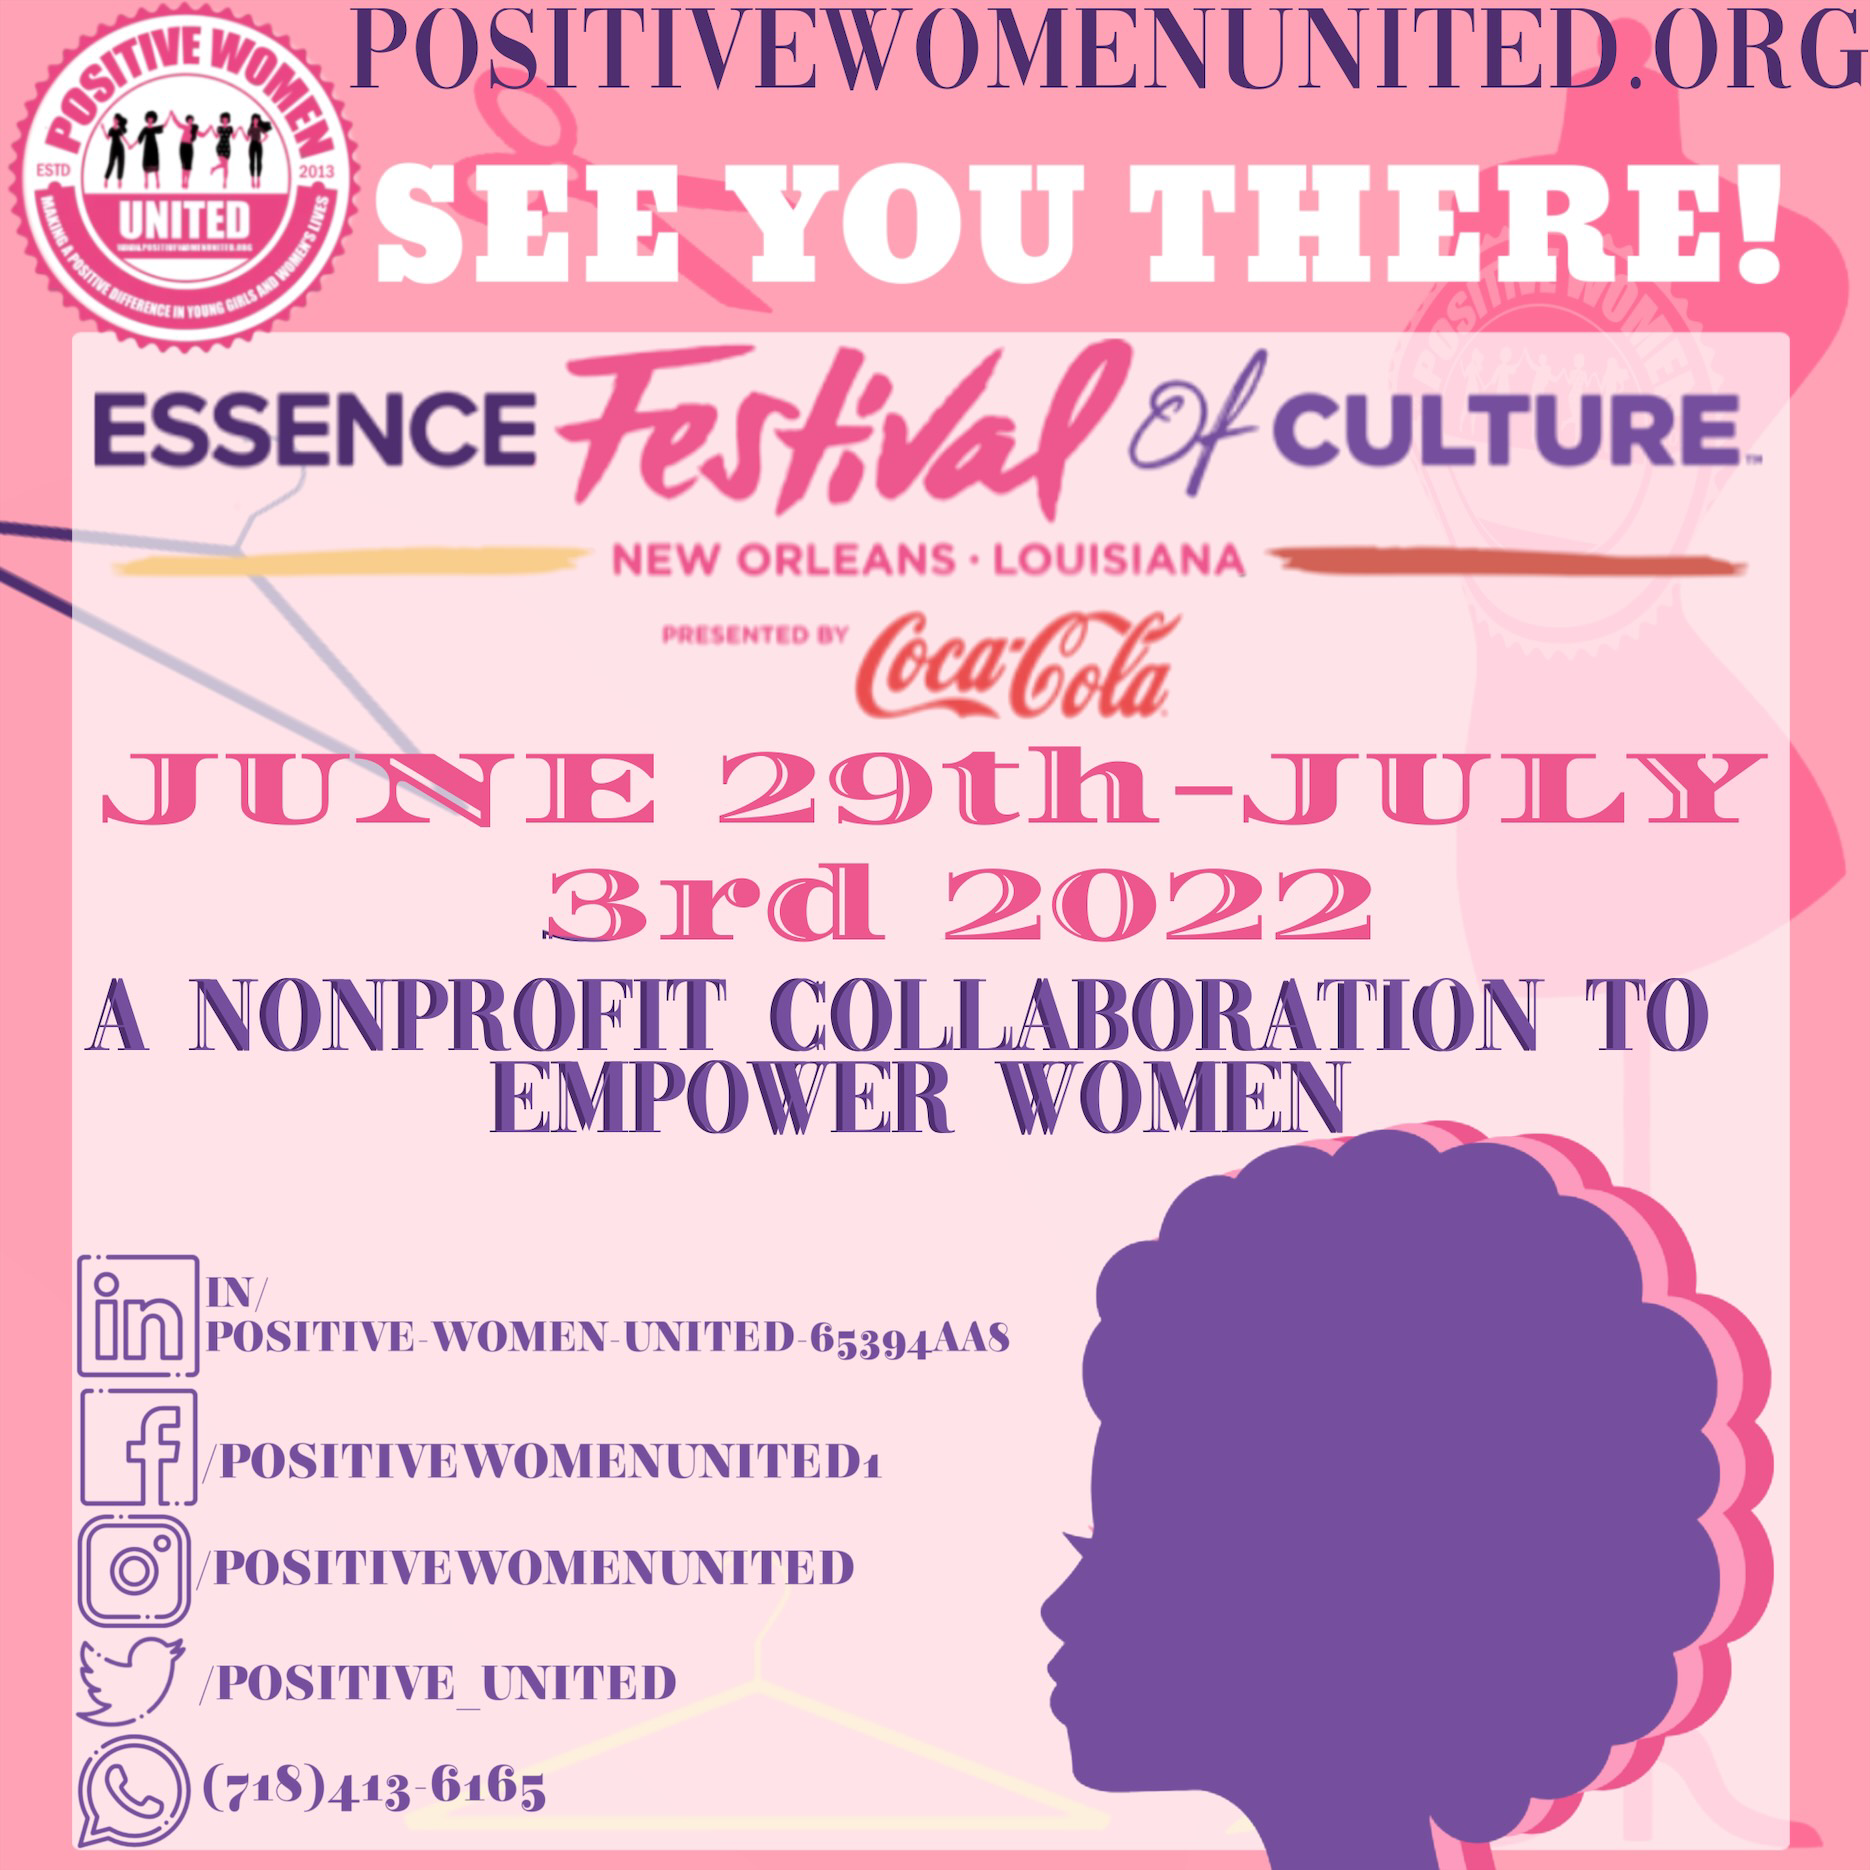 Positive Women United is at Essence Festival Of Culture!!